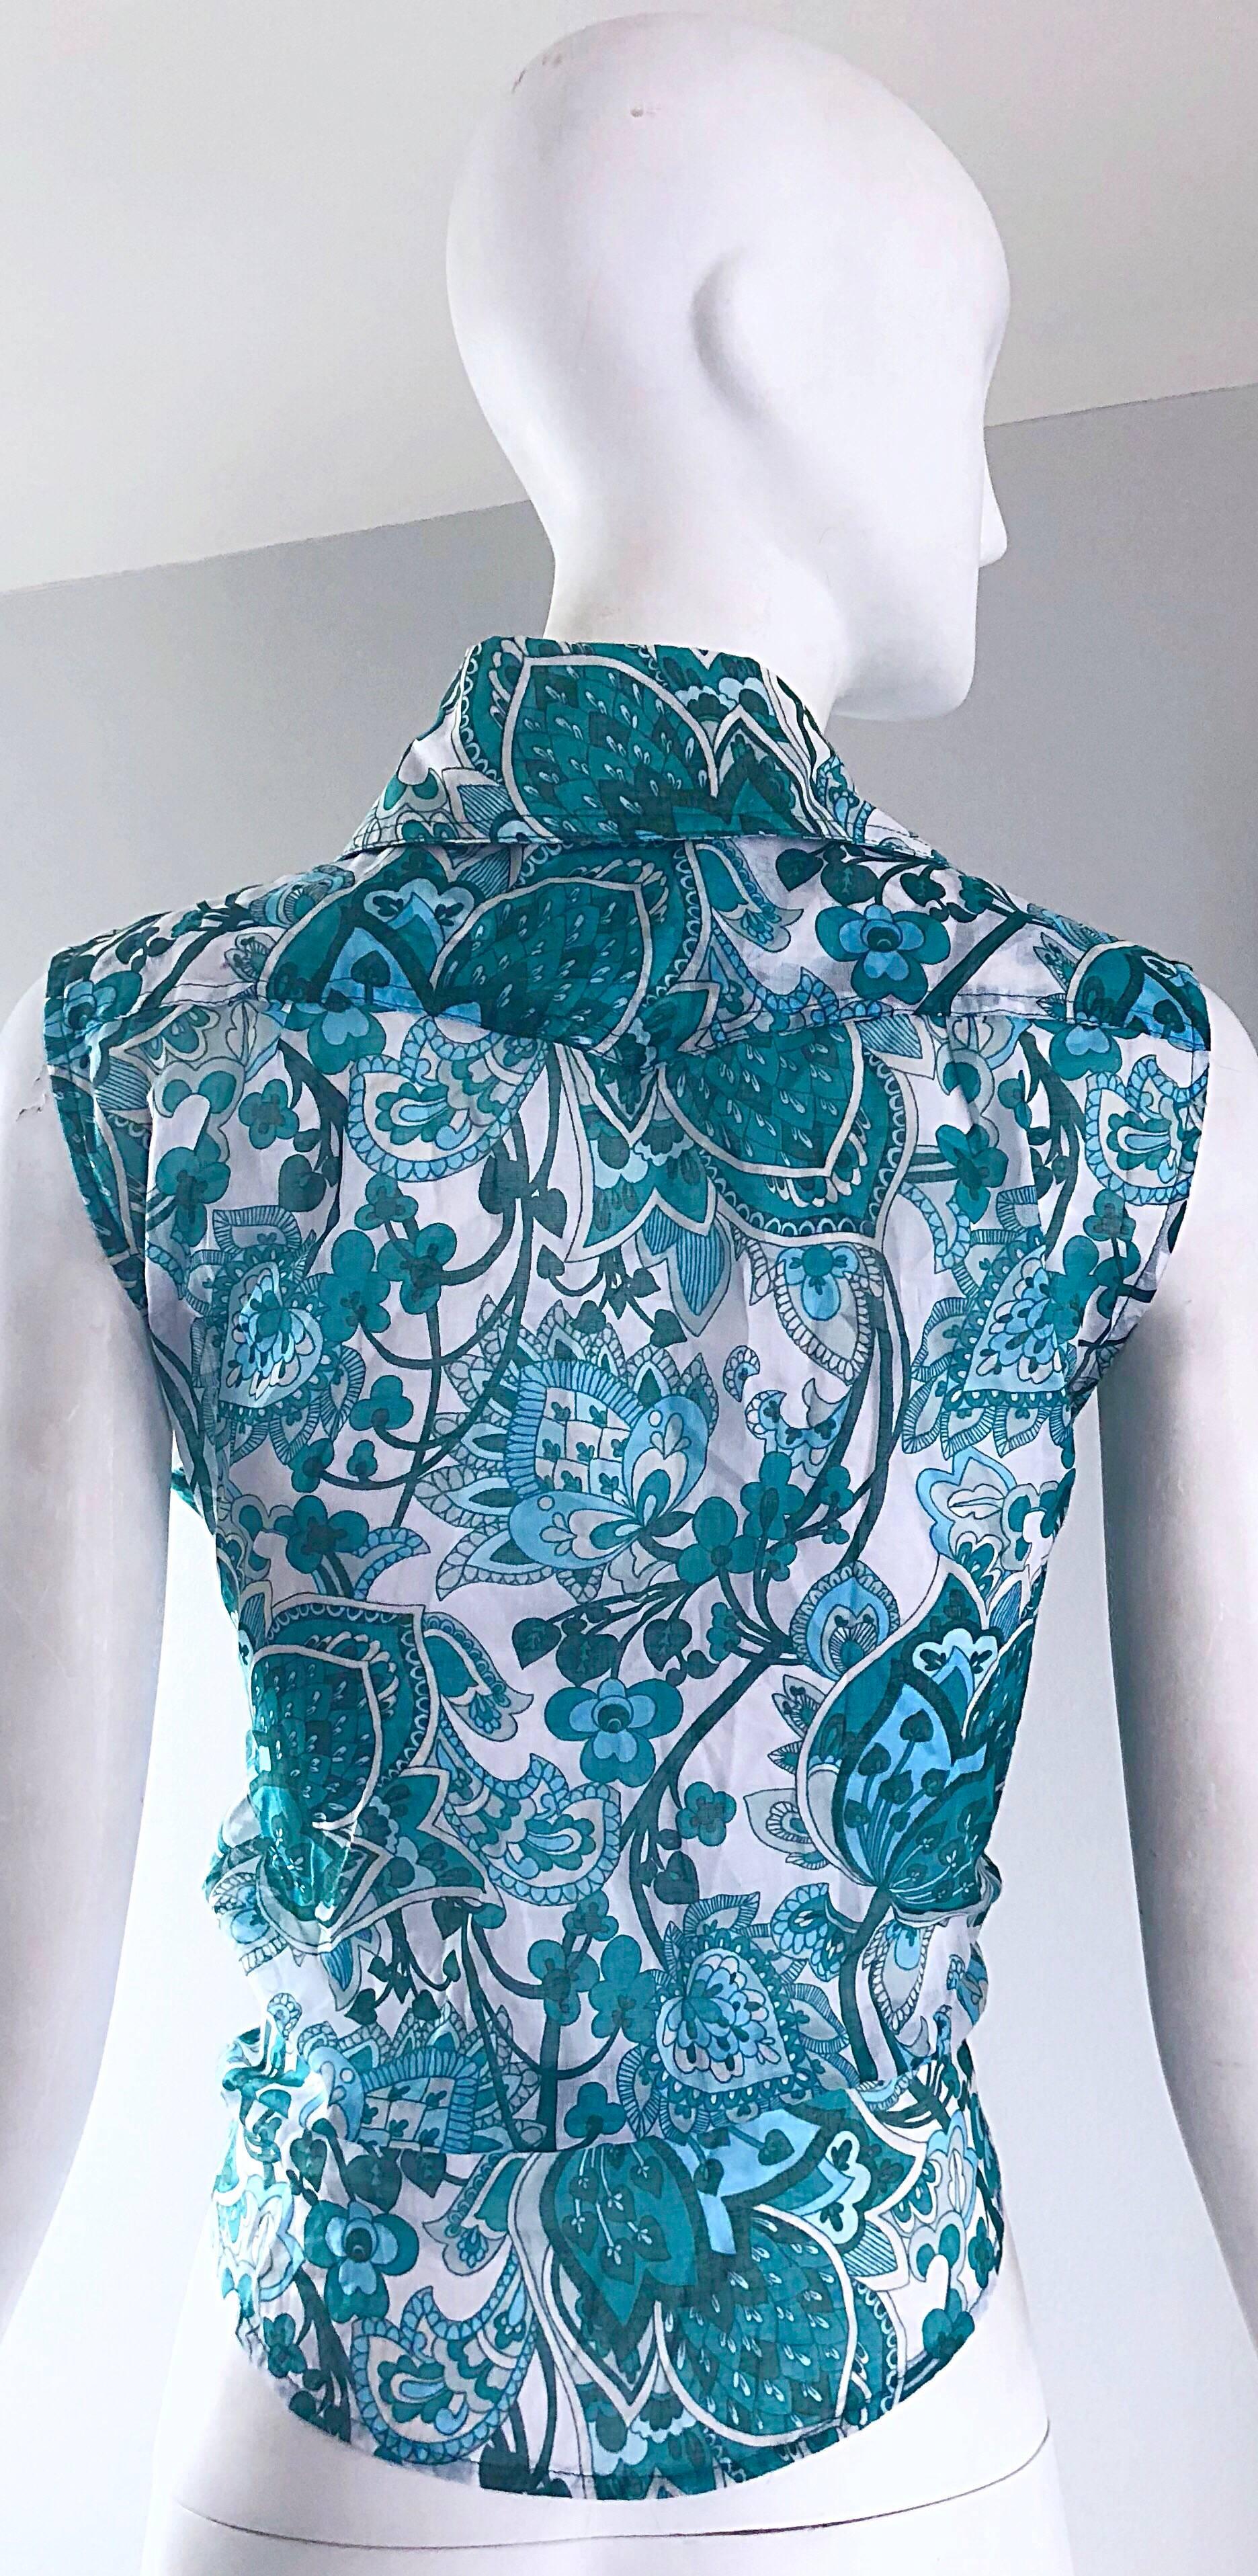 Patrizia Pepe Turquoise Blue Teal and White Paisley Vintage Crop Top, 1990s  In Excellent Condition For Sale In San Diego, CA